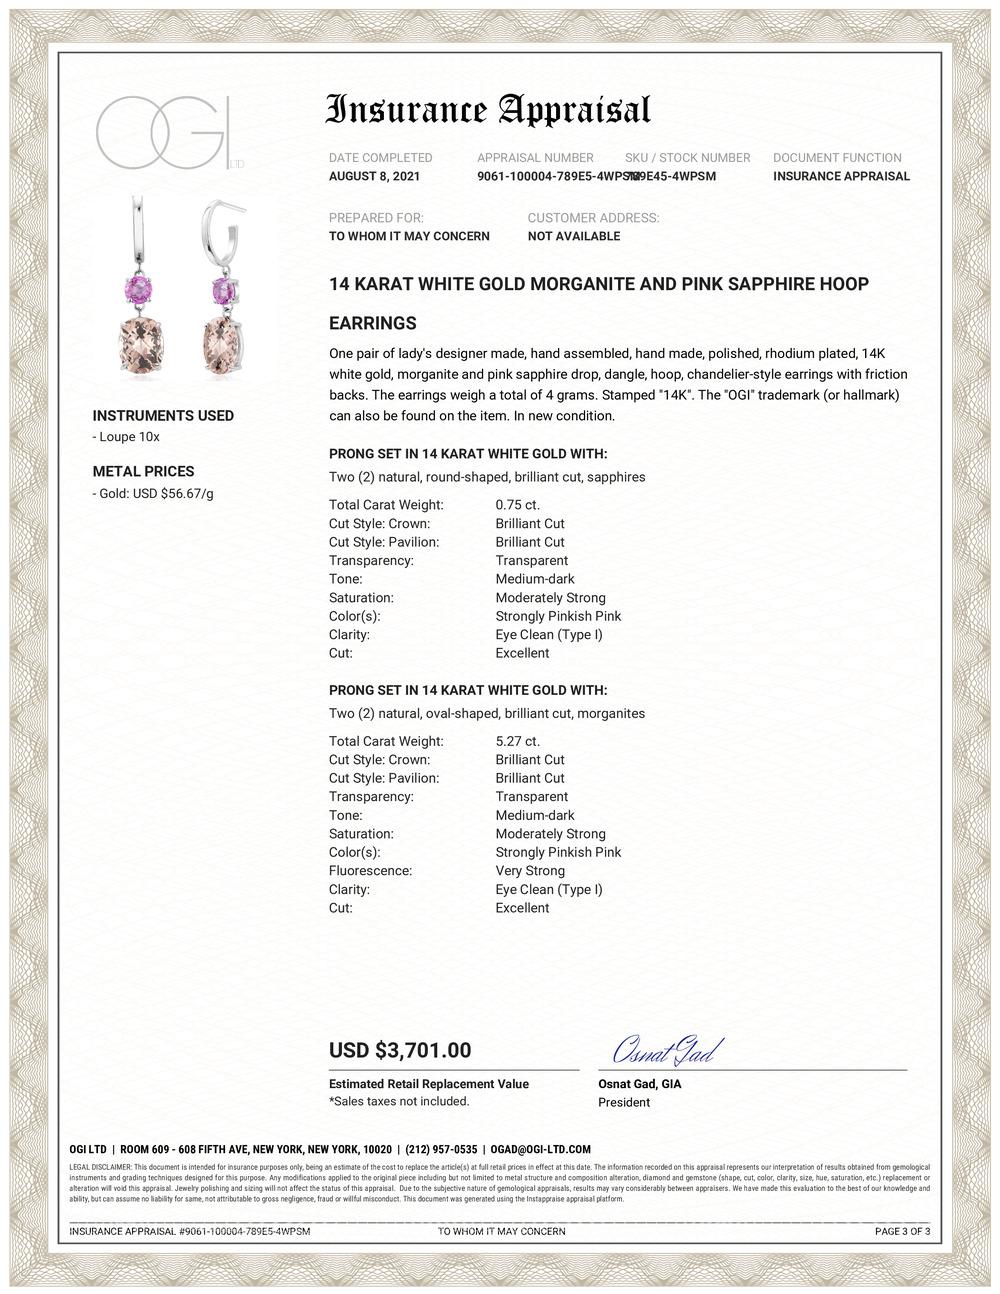 Fourteen karats yellow gold morganite and pink sapphire hoop drop earrings 
A pair of round pink sapphire weighing 0.75 carats
Two oval-shaped morganite weighing 5.27 carat 
Morganite hue tone color is peach pink
New Earrings
Handmade in the